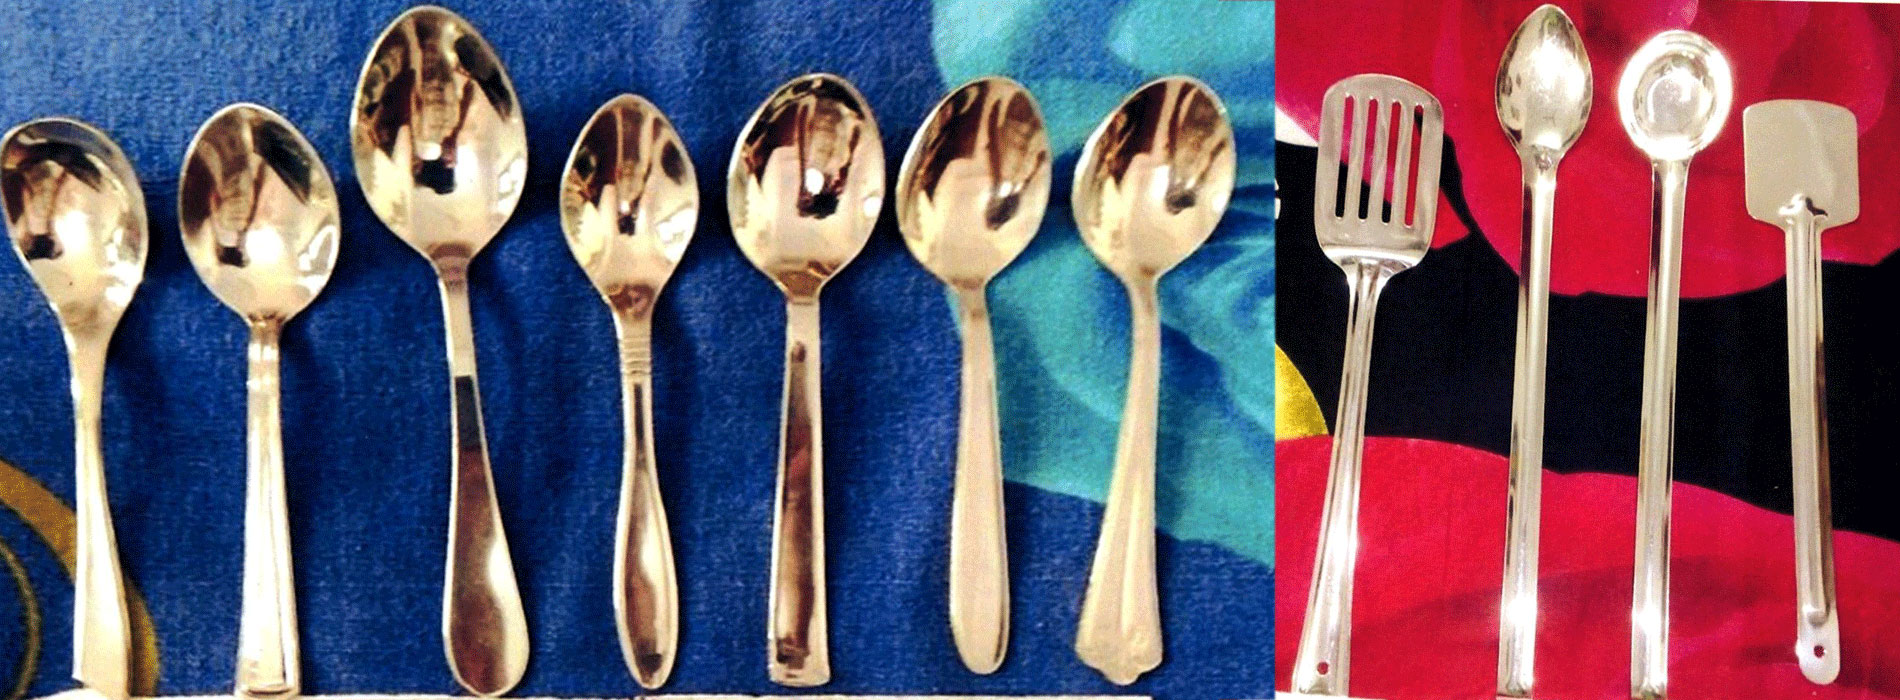 Crafts India - largest exporter of stainless steel cutlery in uttar pradesh, india